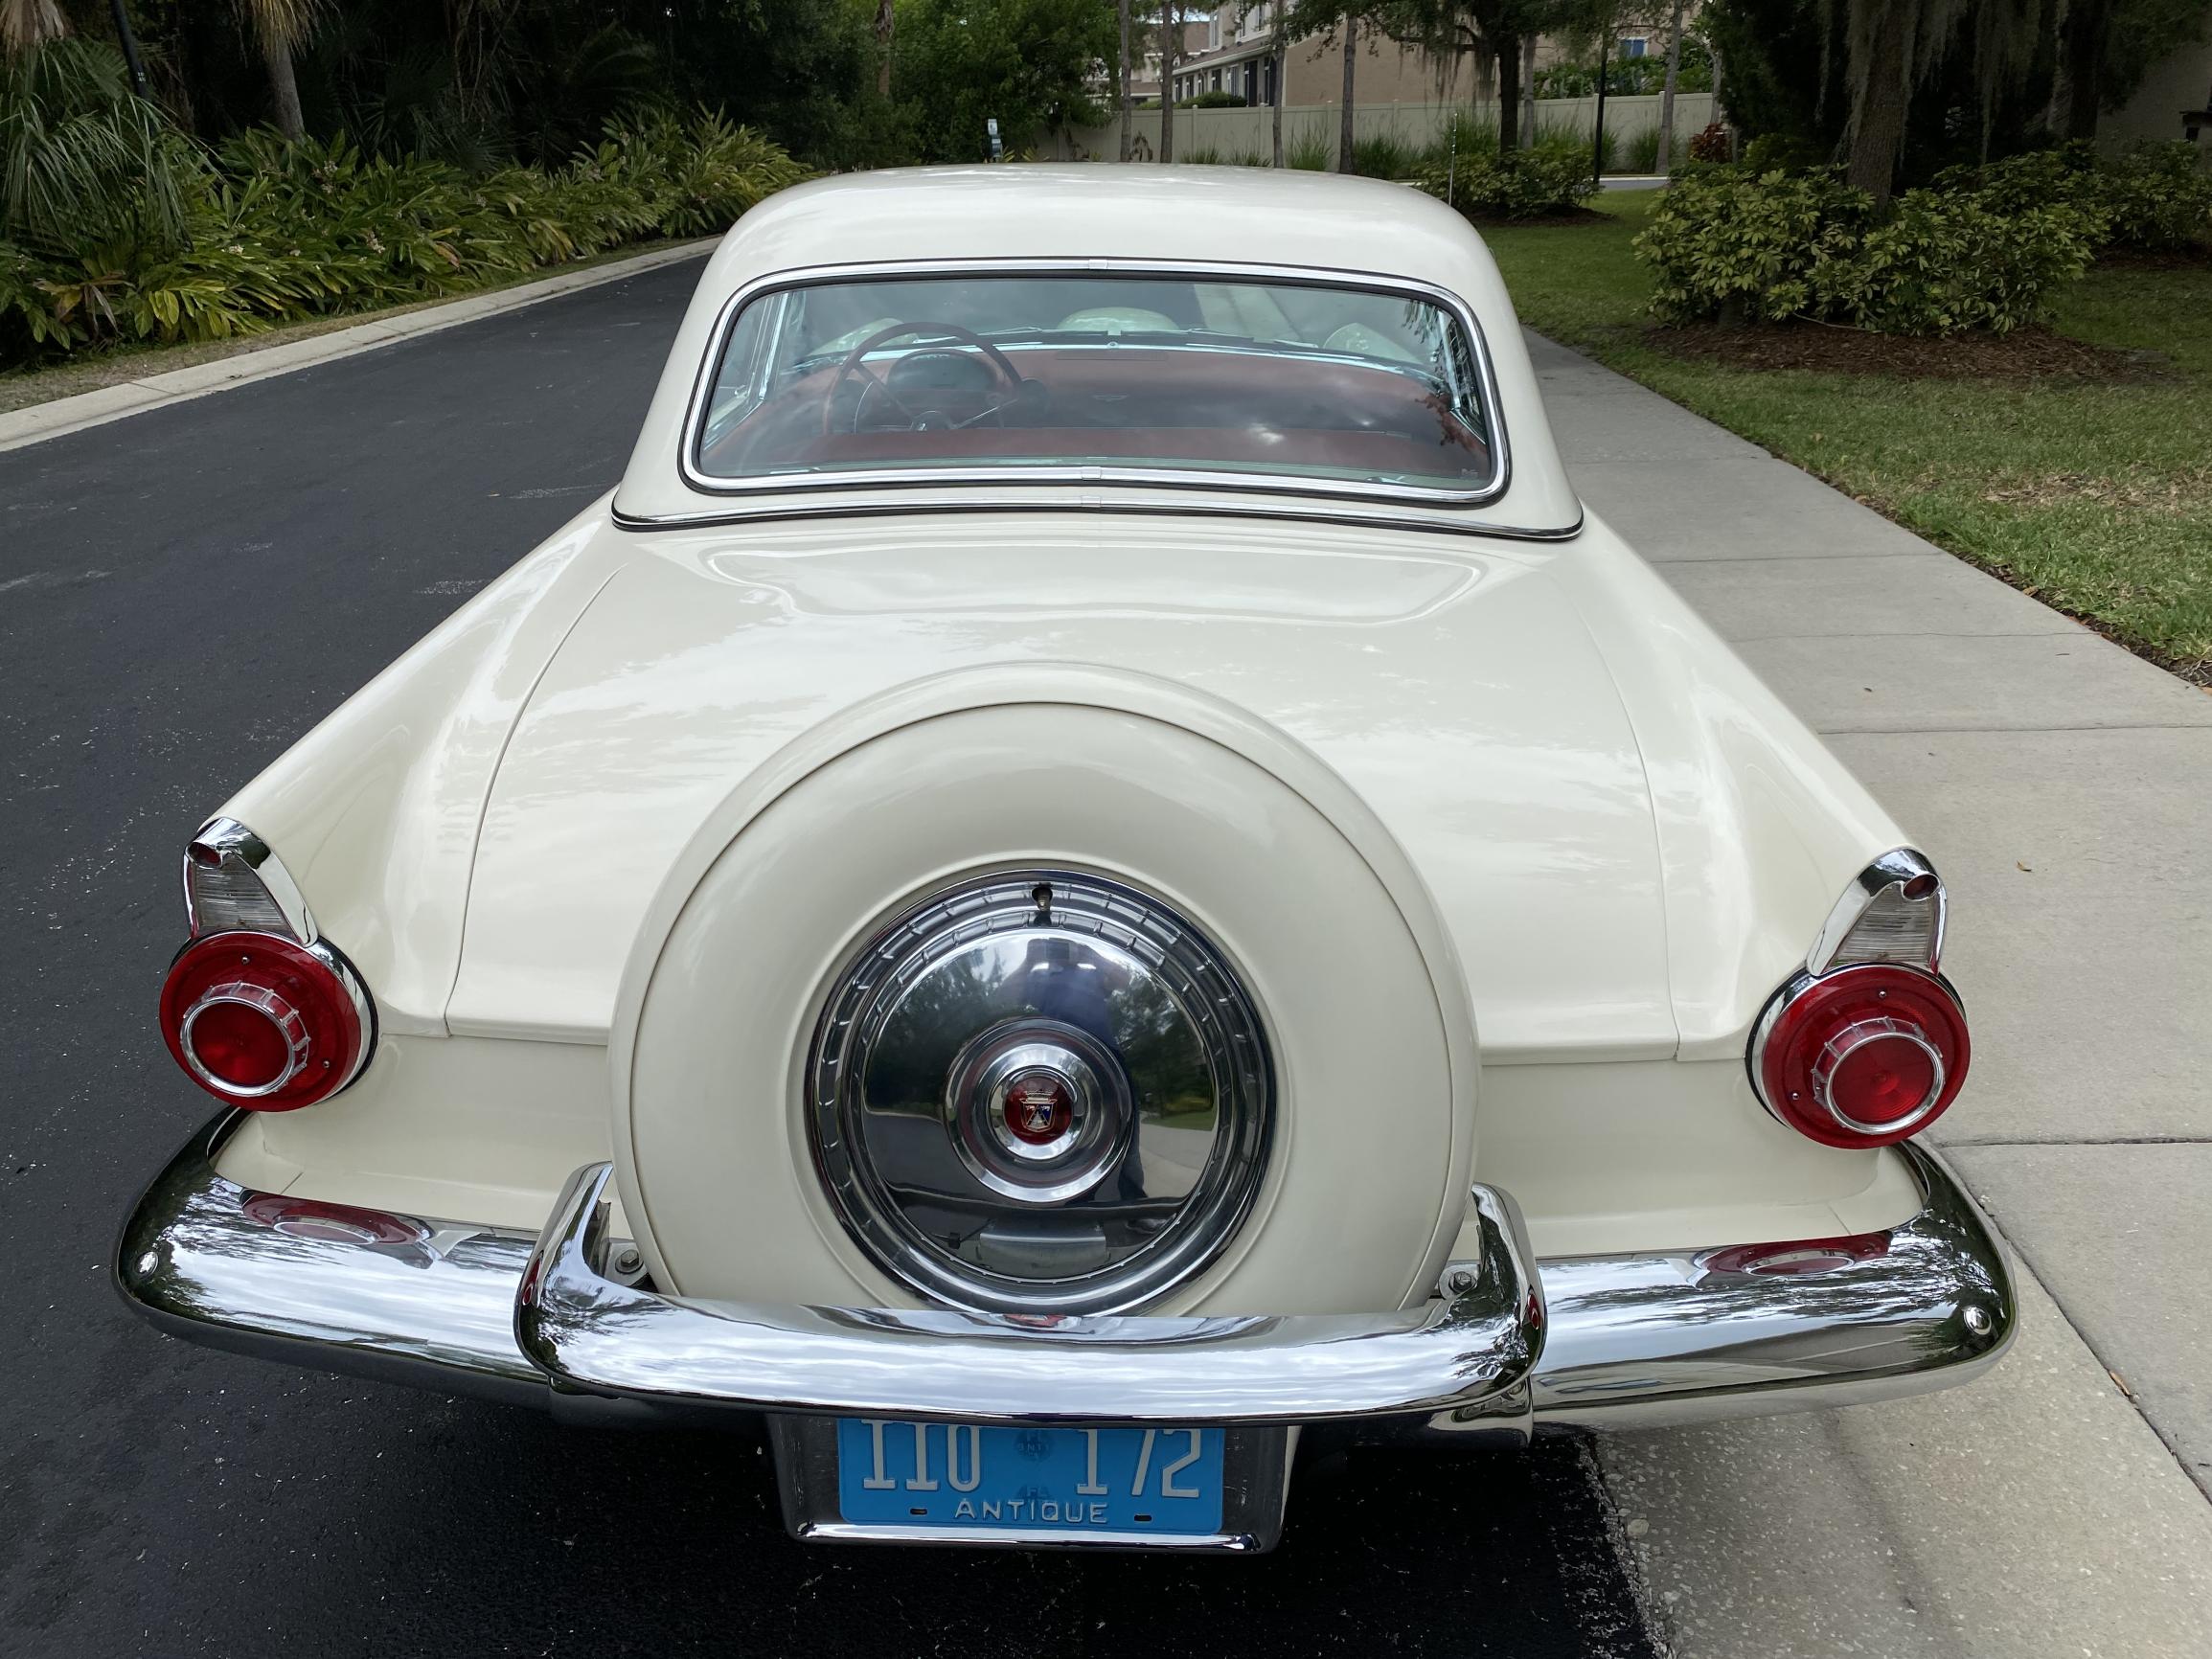 1956 Ford Thunderbird Rear End View